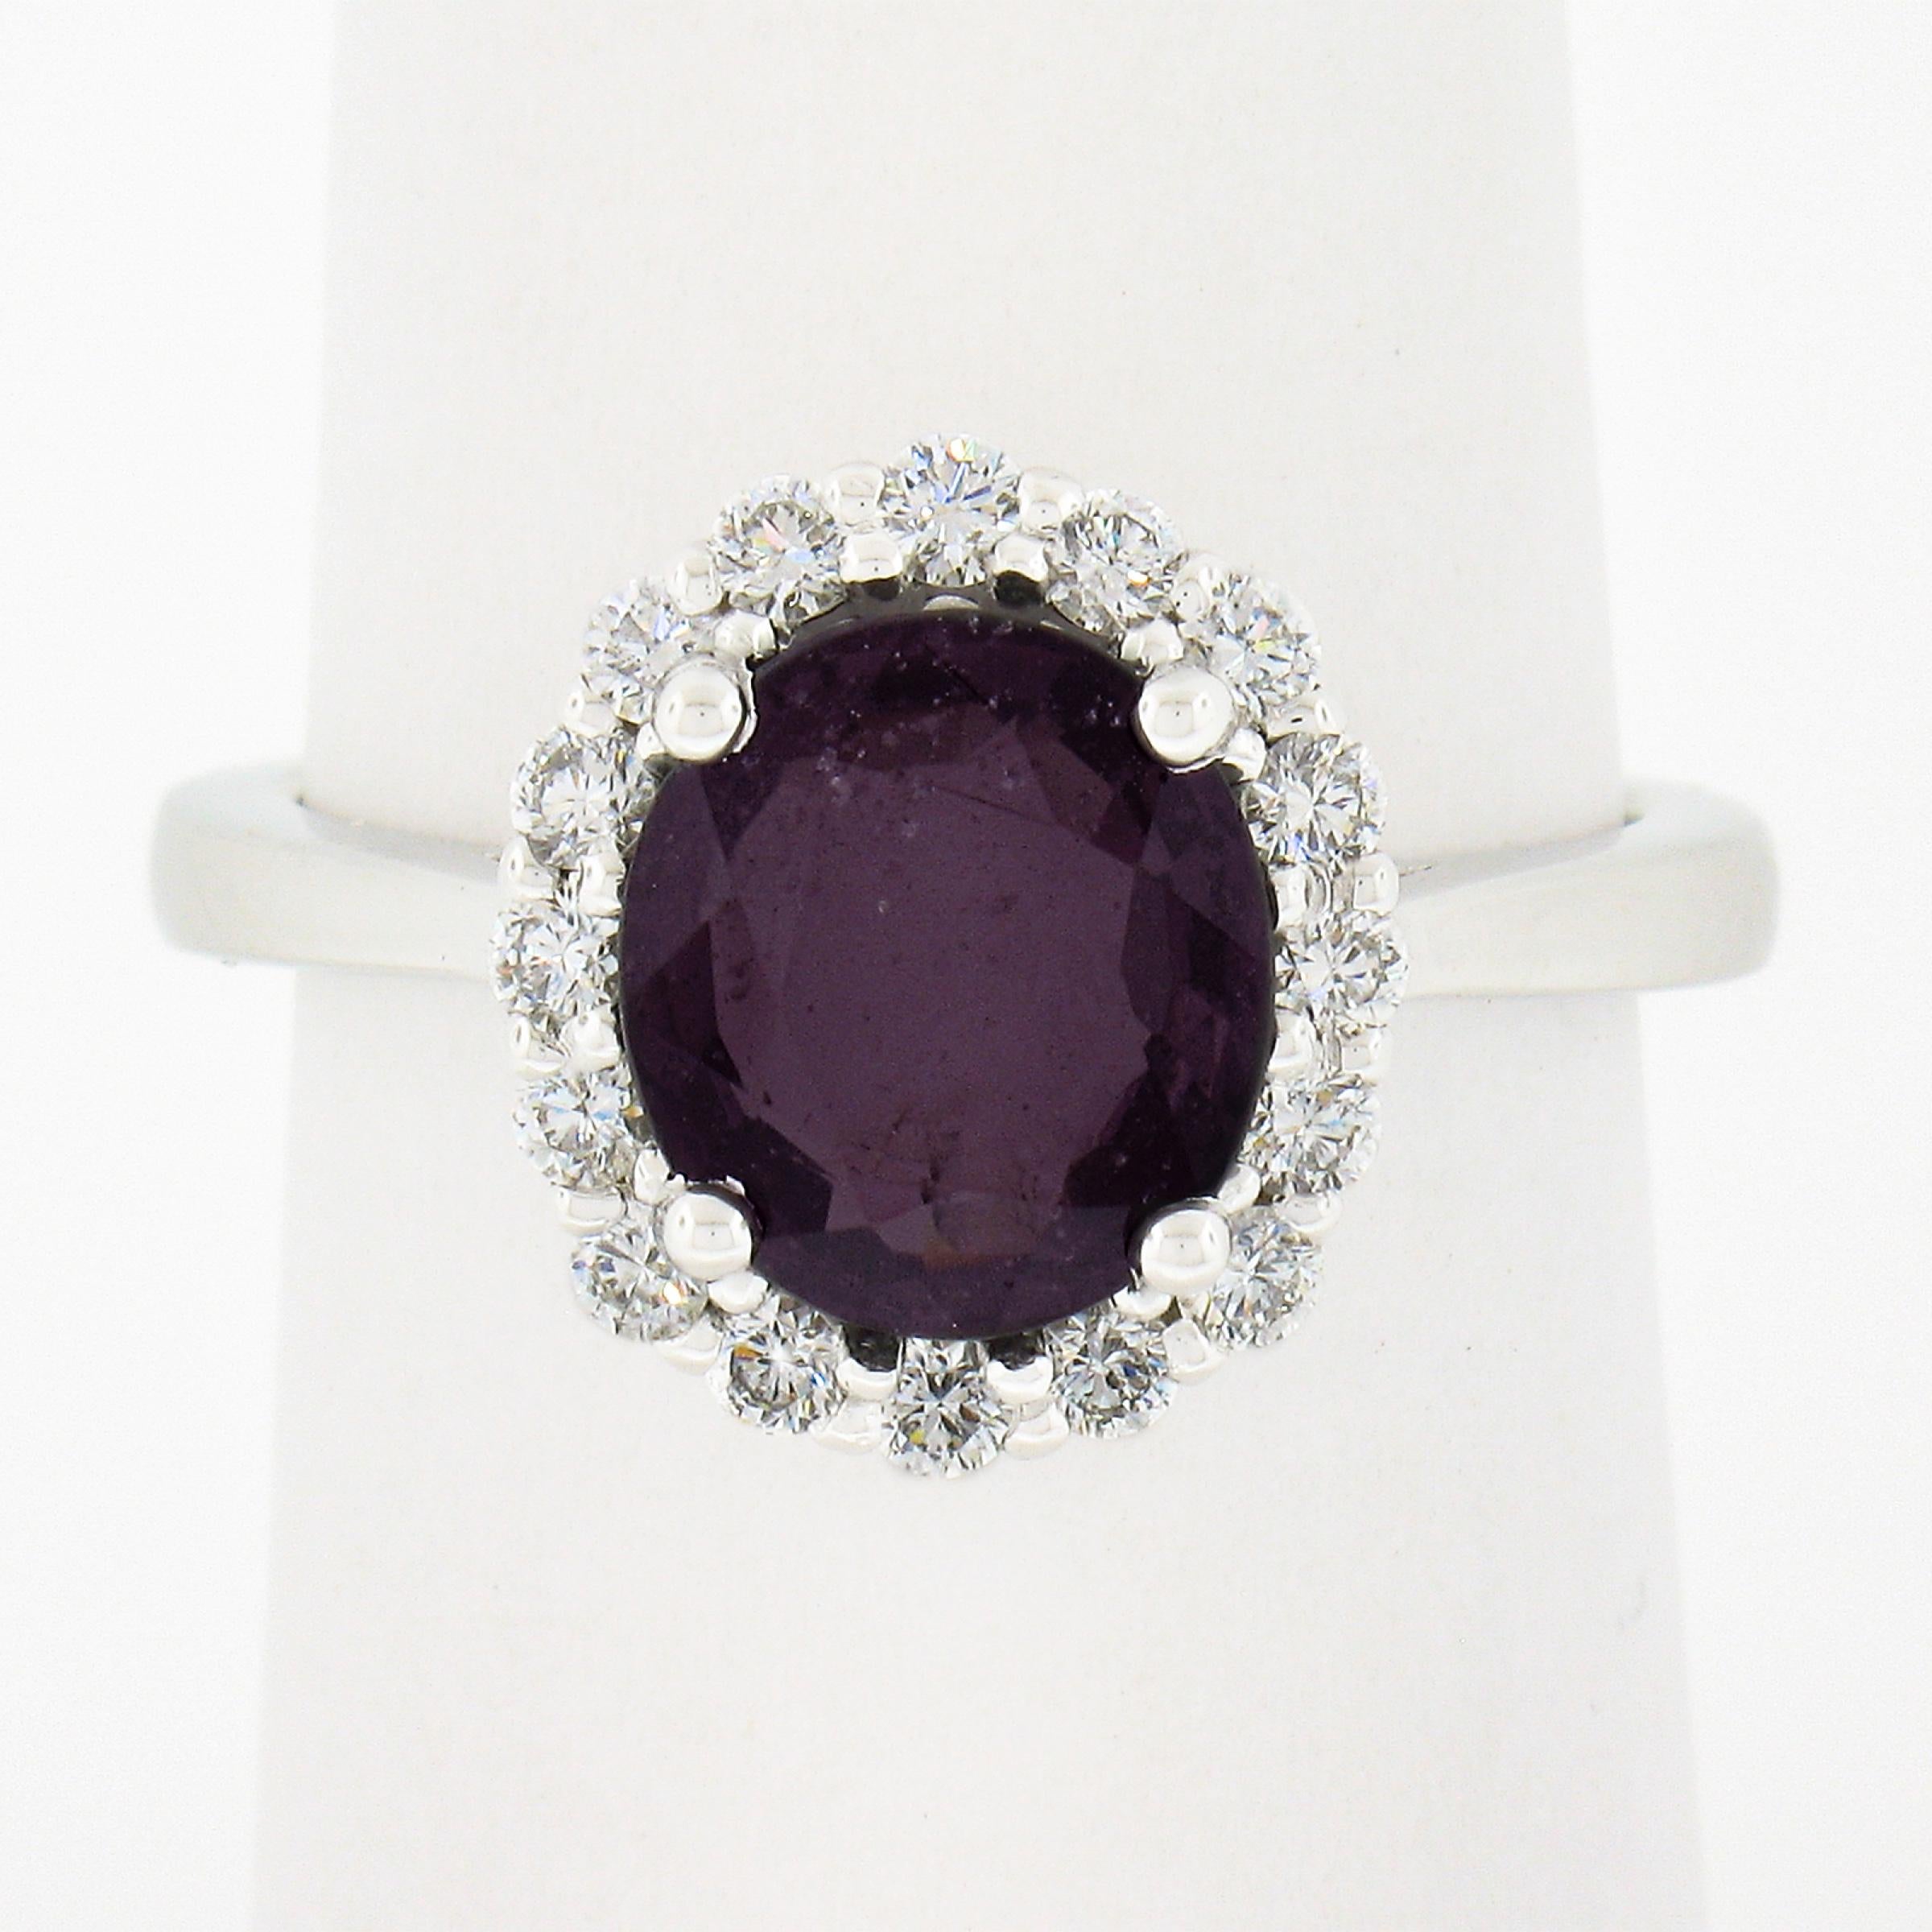 This unique and well made spinel and diamond halo ring is newly crafted in solid 14k white gold and features a wonderful, 2.52 carat deep purple spinel that is GIA certified at being 100% natural genuine stone with no treatment of any sort. This